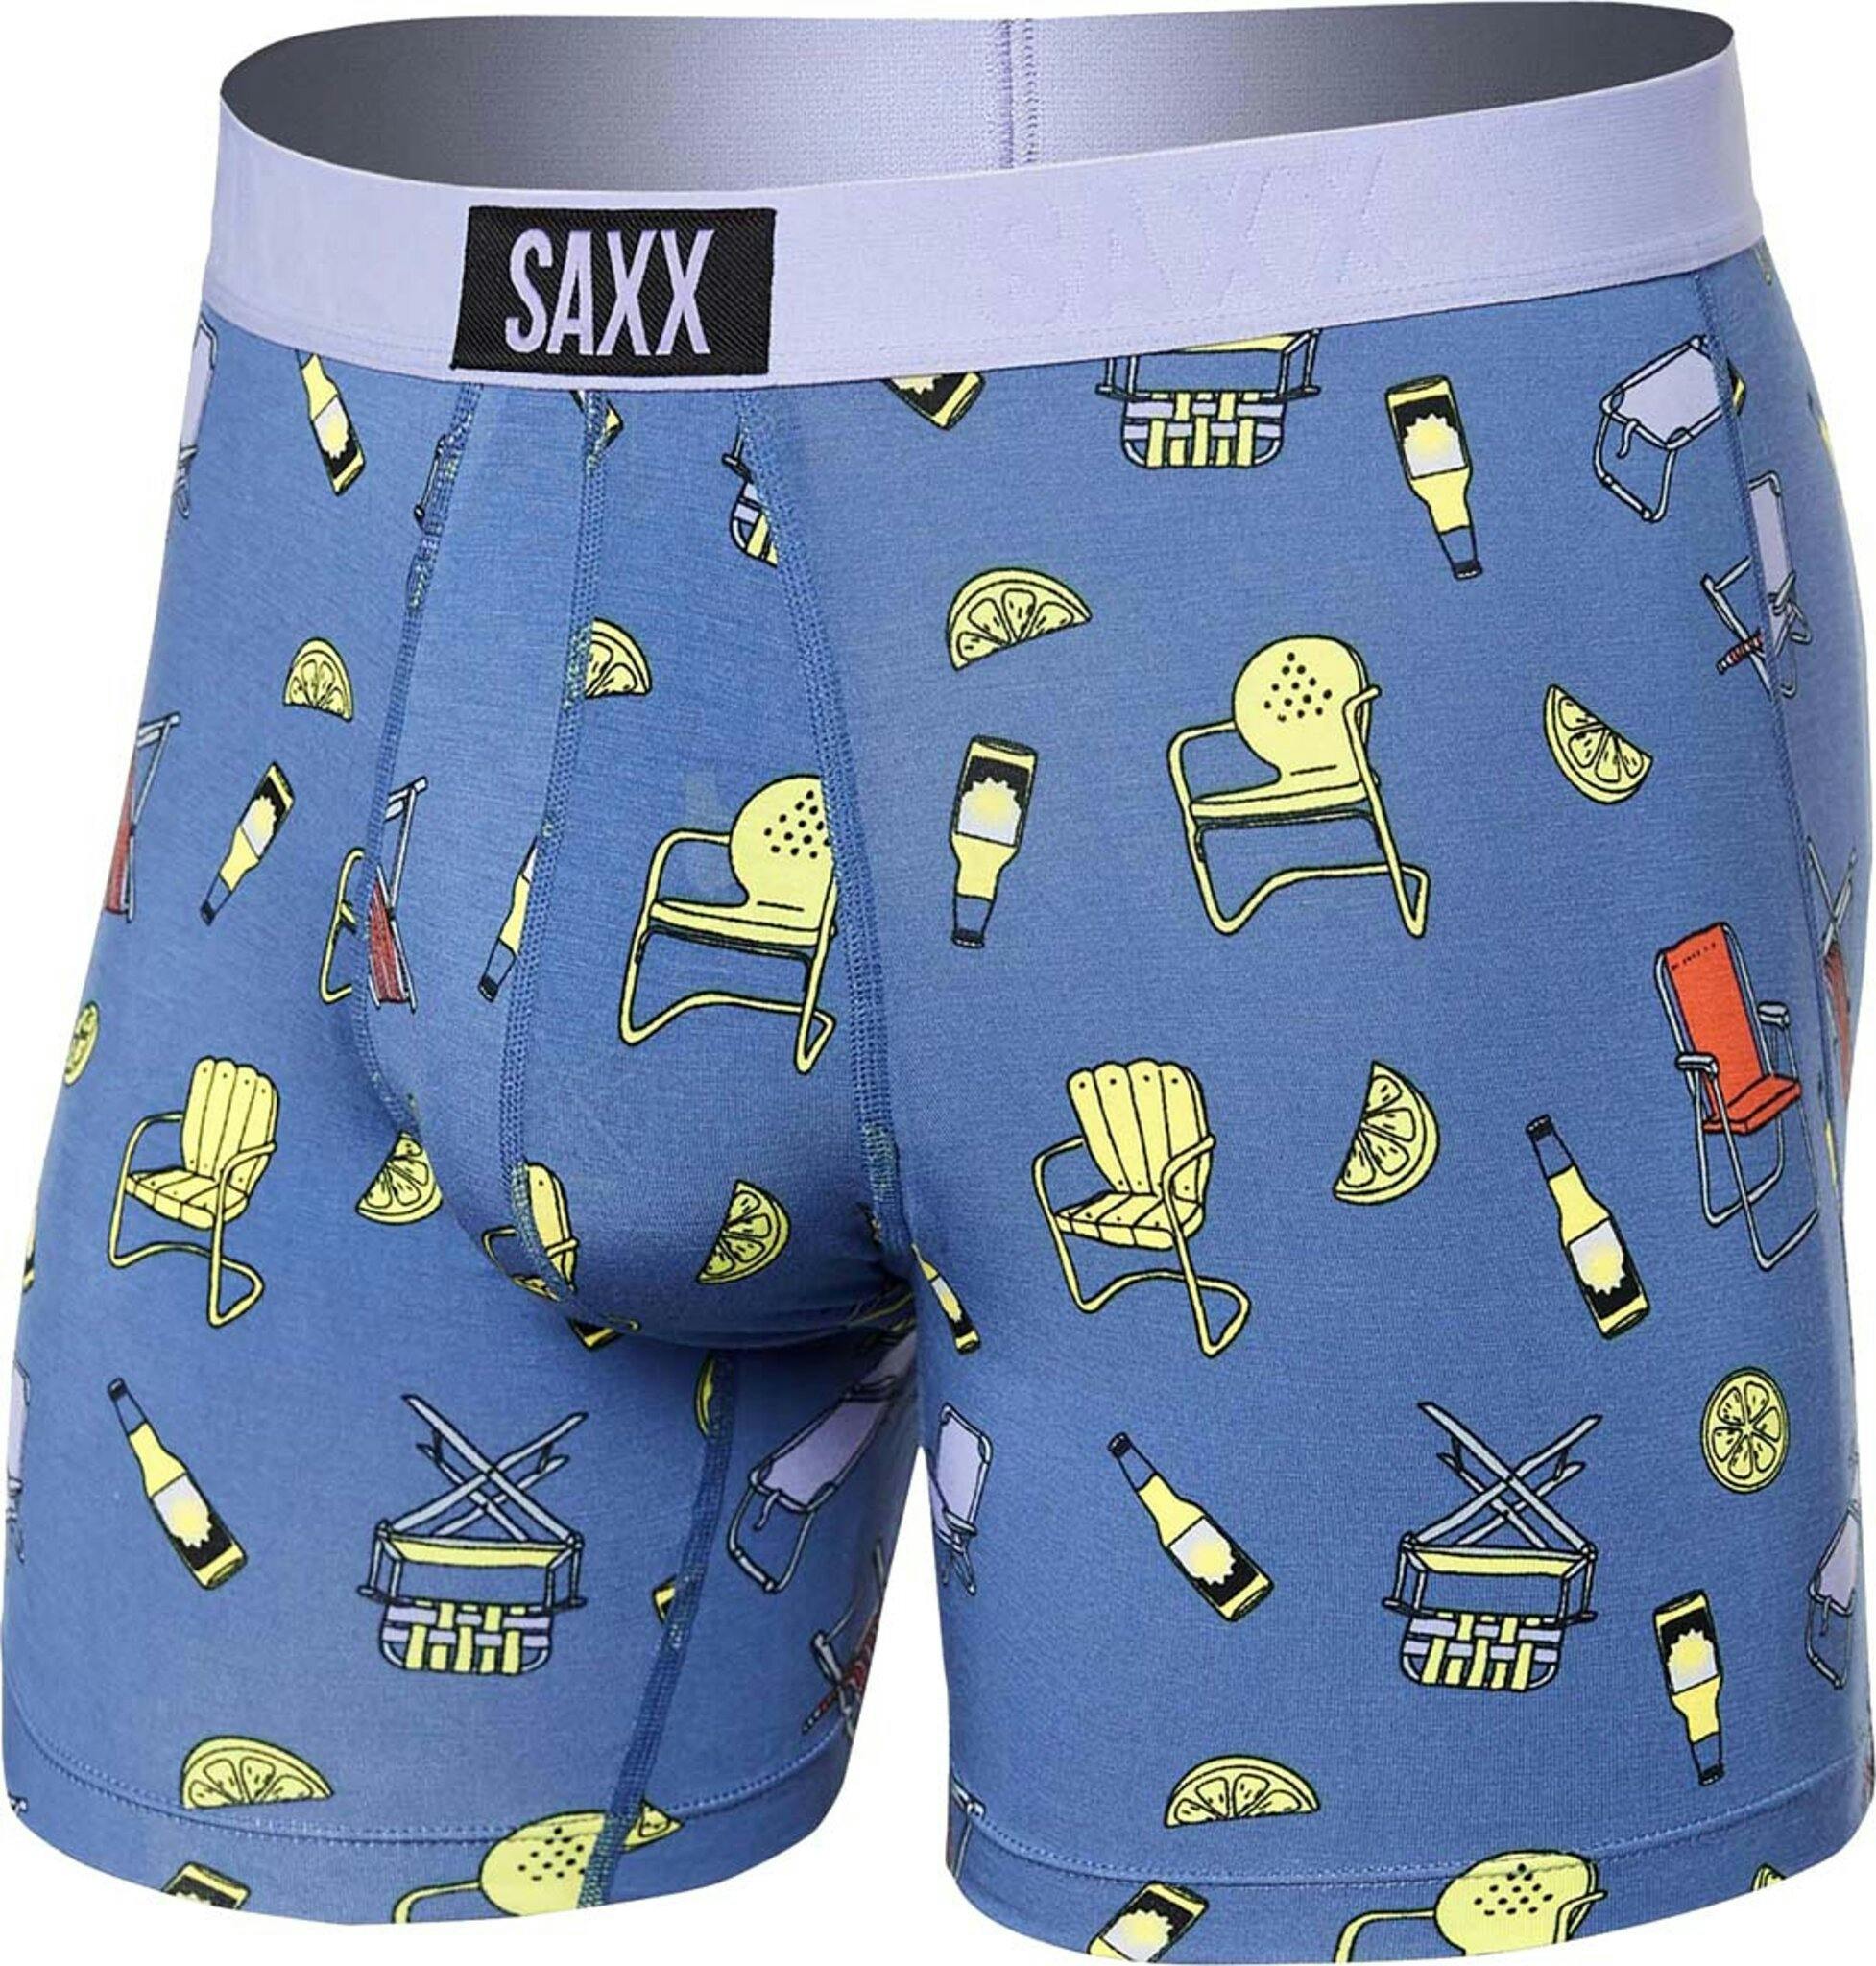 Product image for Vibe Boxer Brief - Men's